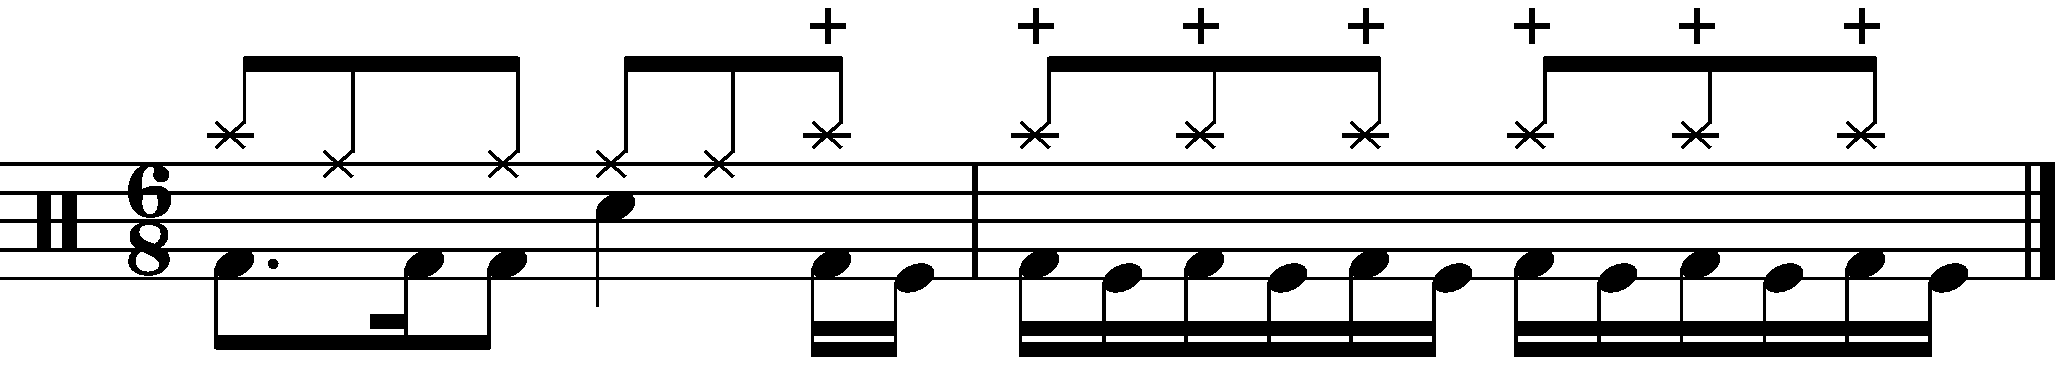 Constructing fills with constant 16th note double kick in 6/8.